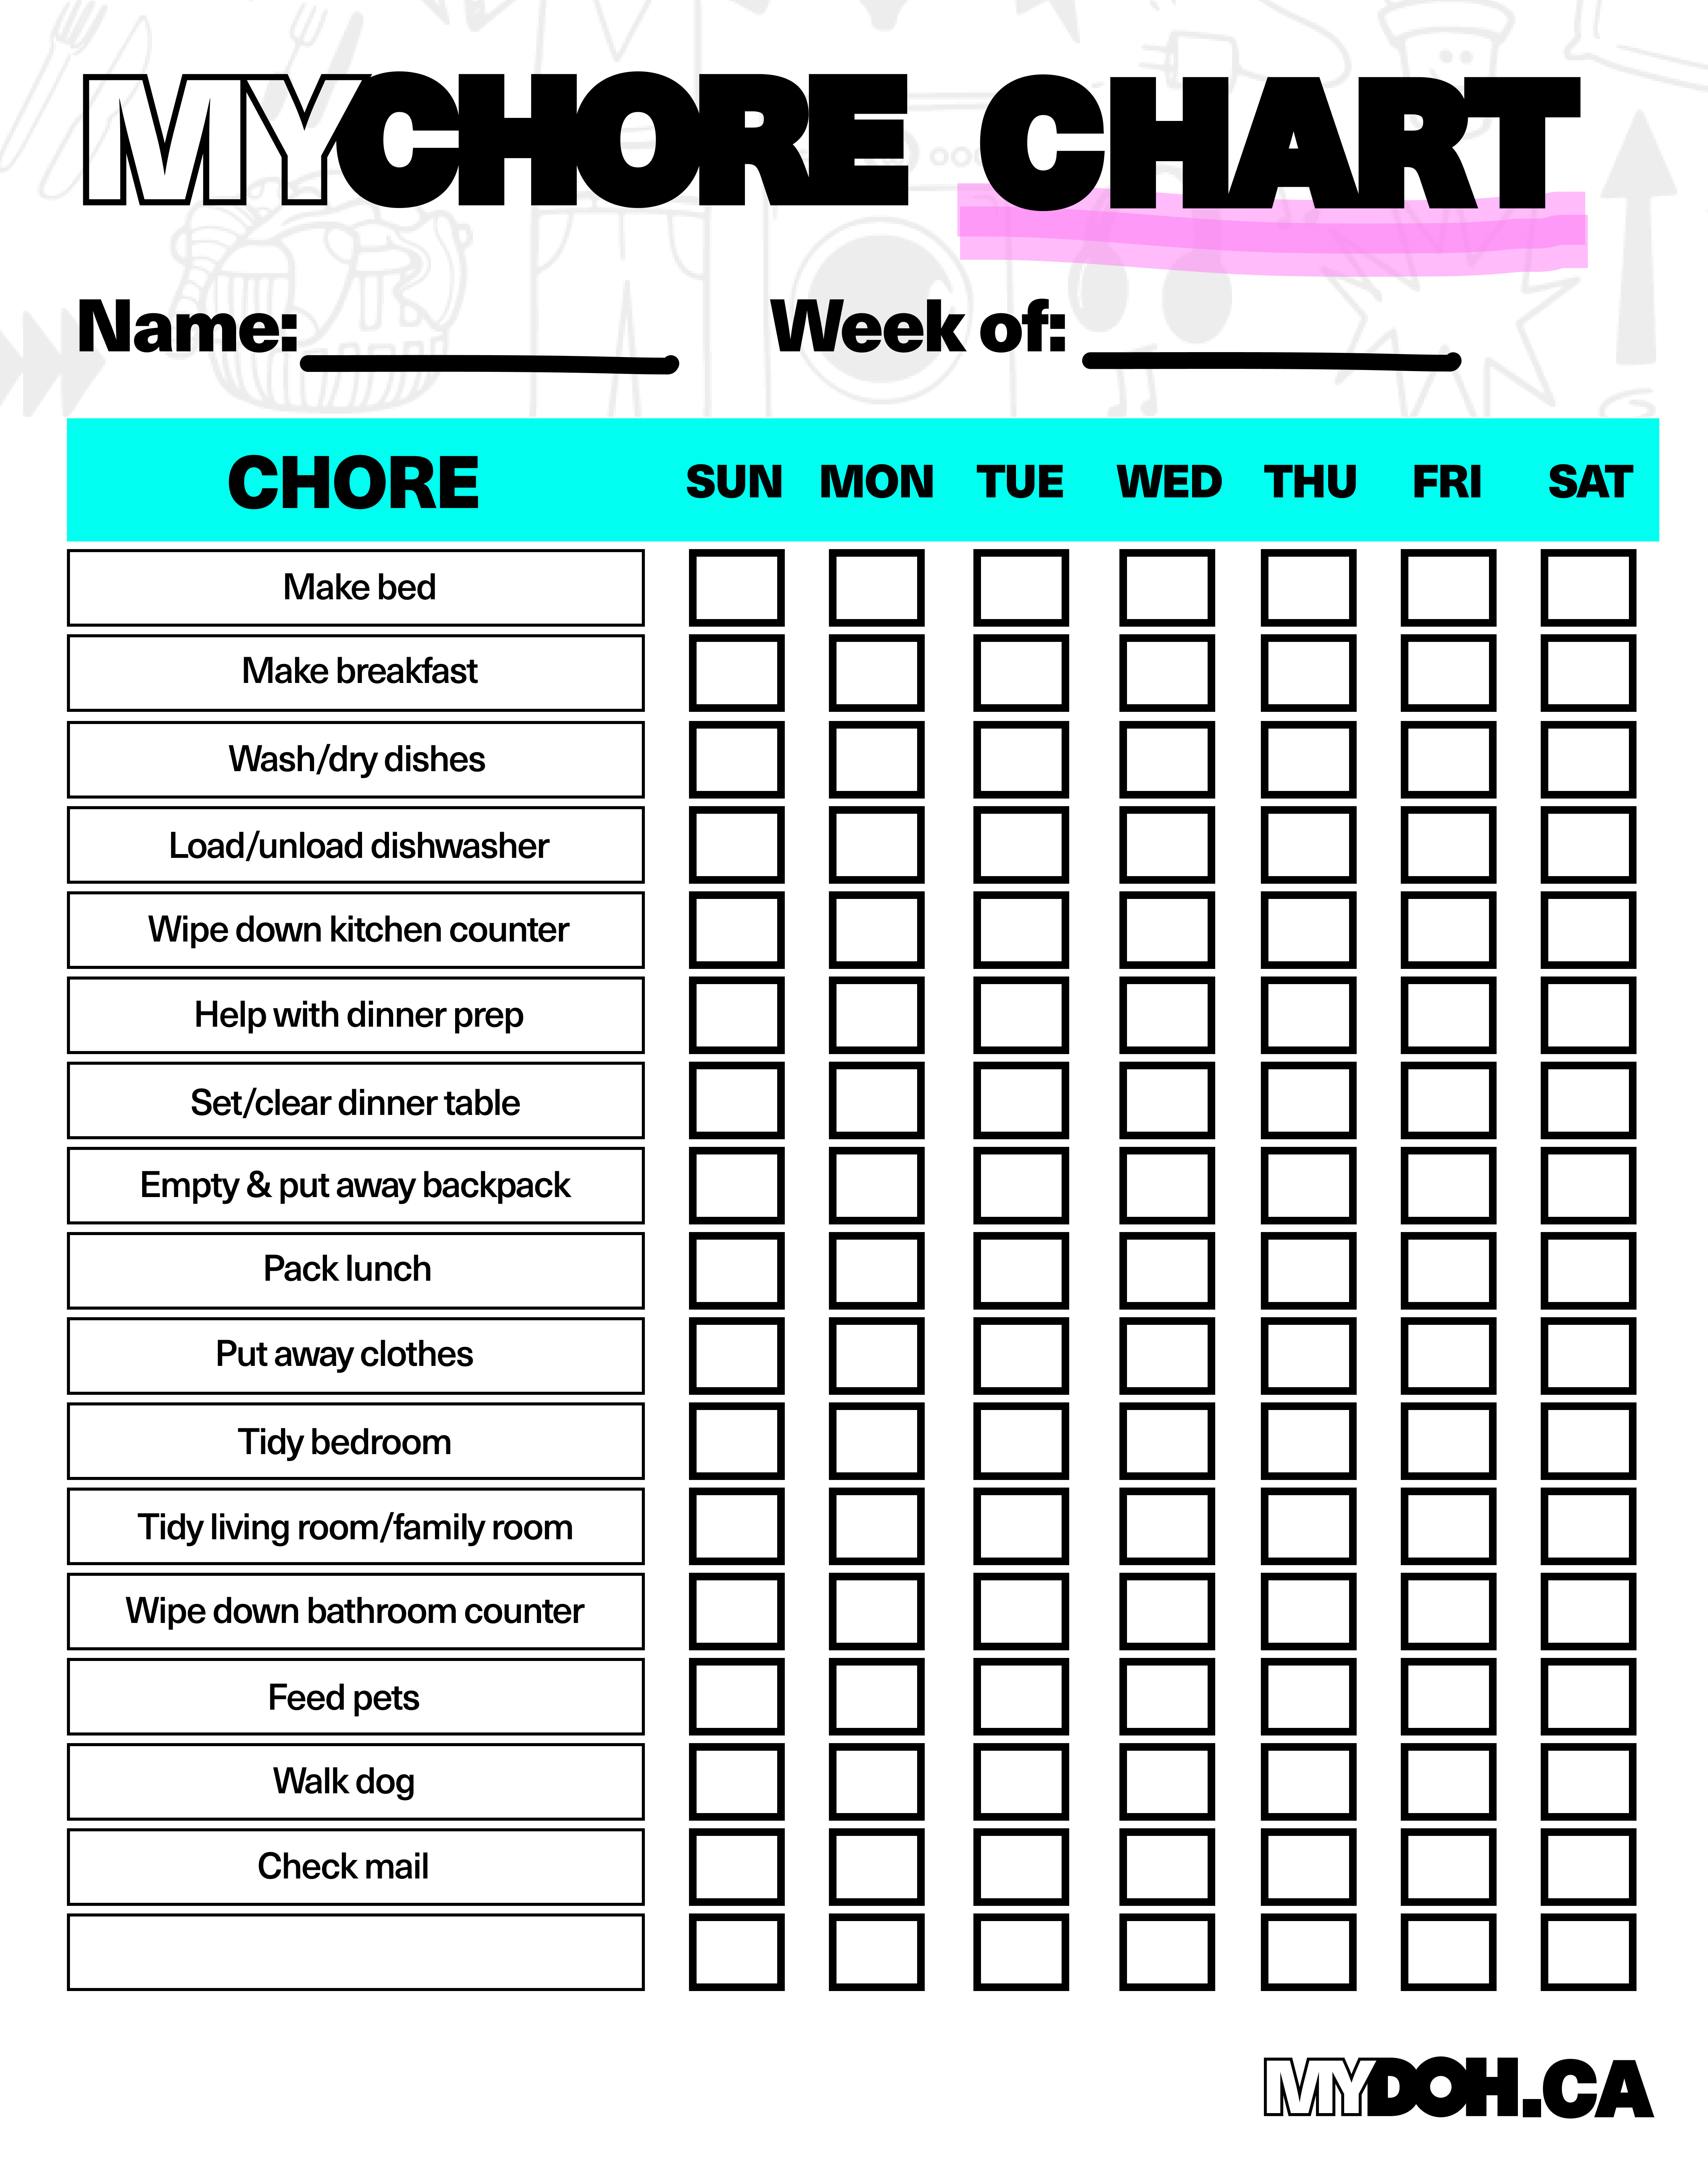 paper-paper-party-supplies-weekly-responsibility-checklist